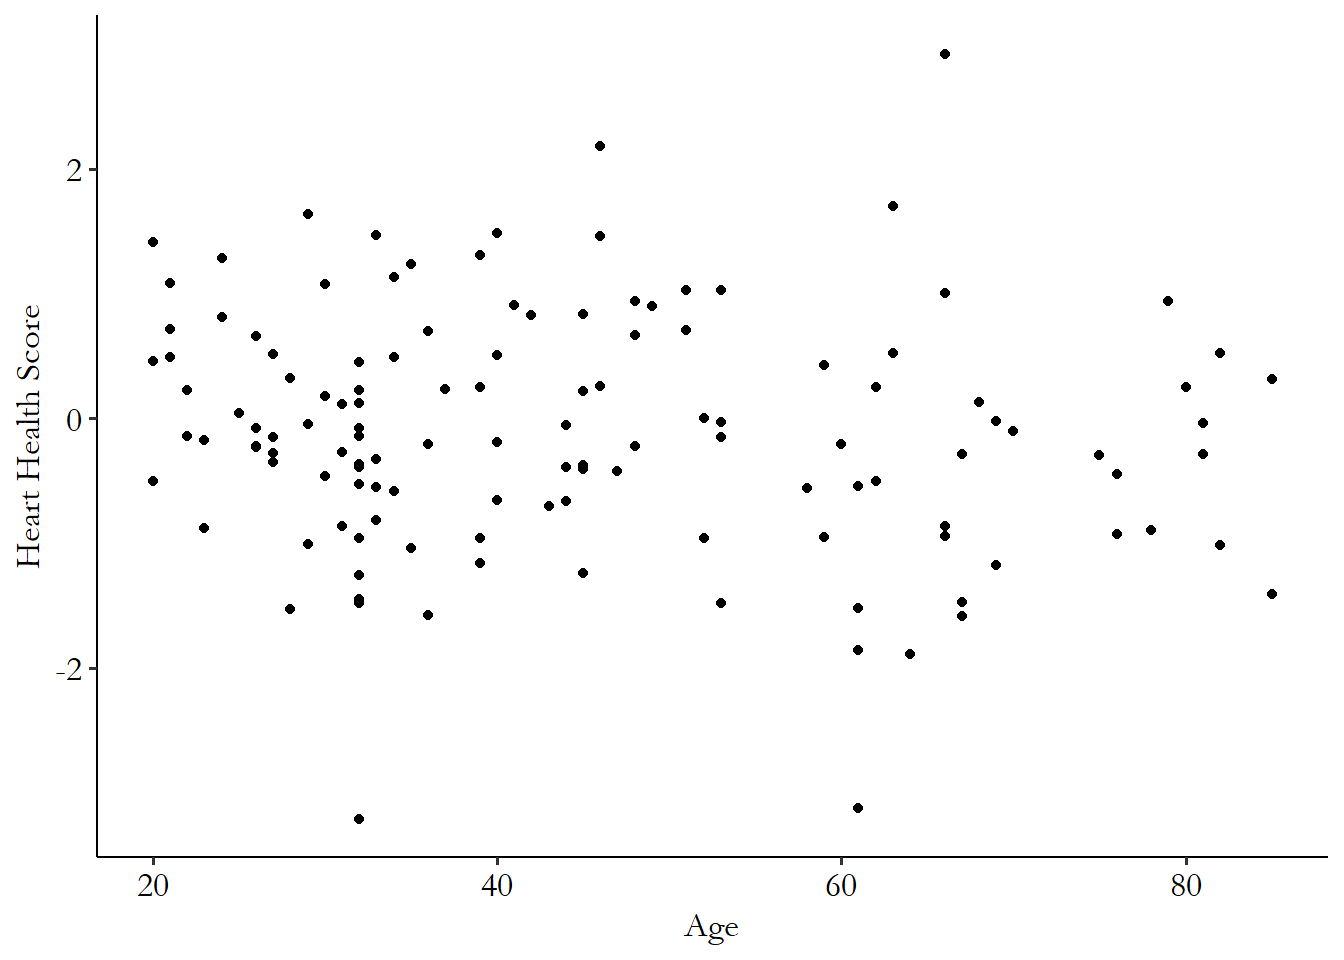 A scatterplot showing a slight negative relationship between age and heart health